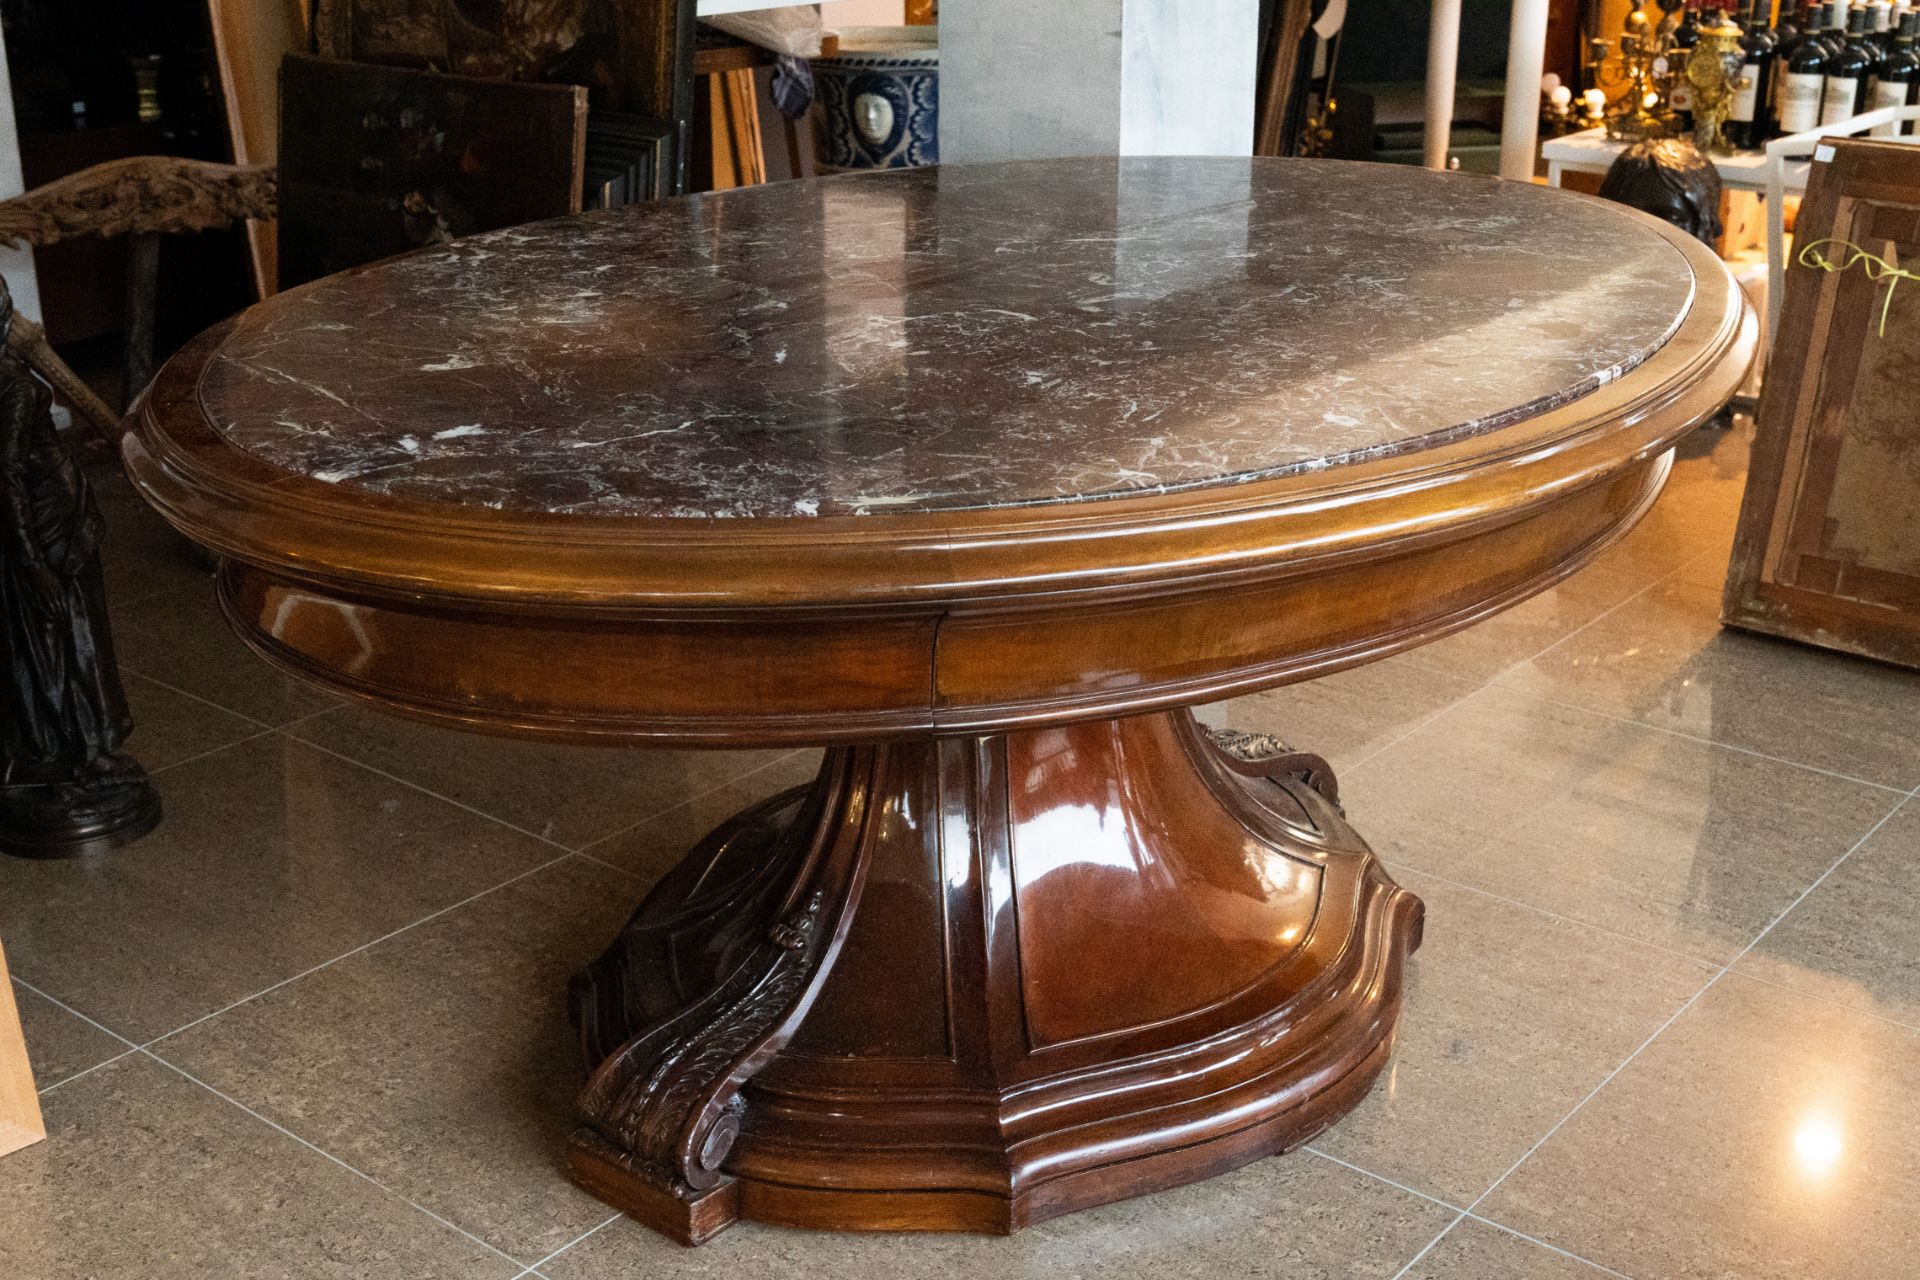 An impressive oval English mahogany table with marble top, 19th C.